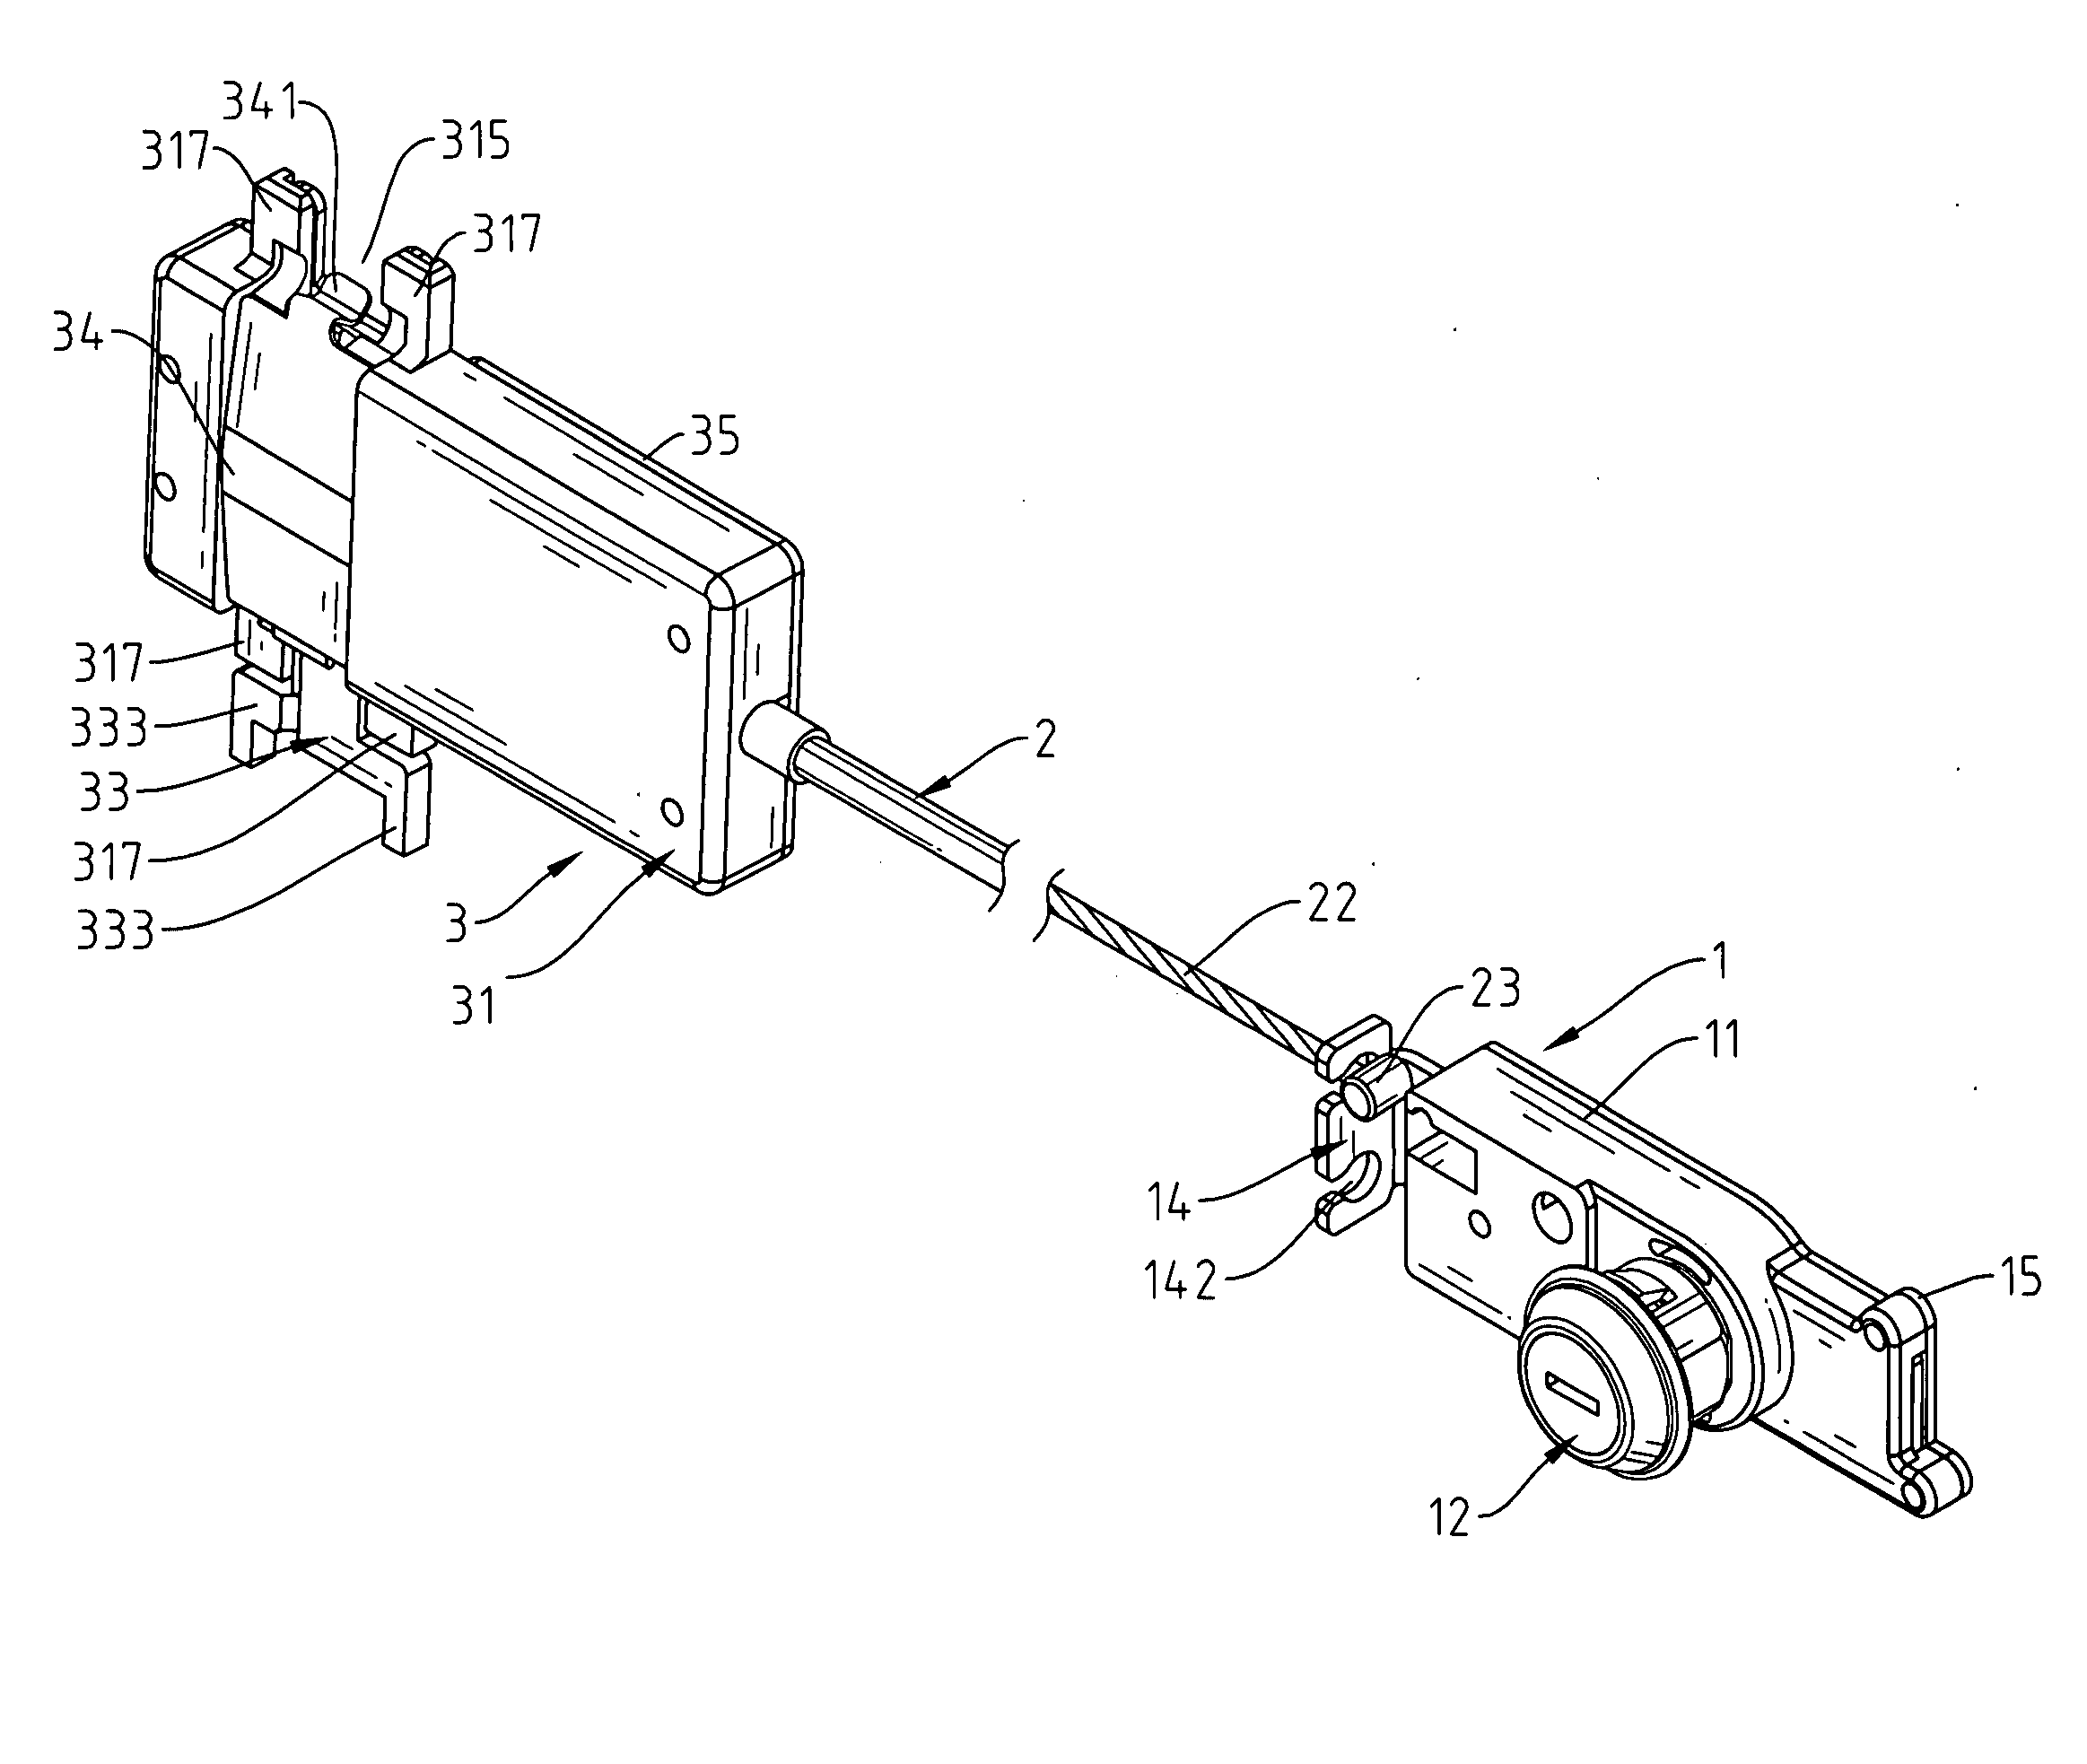 Lock-controlled drawer slide structure